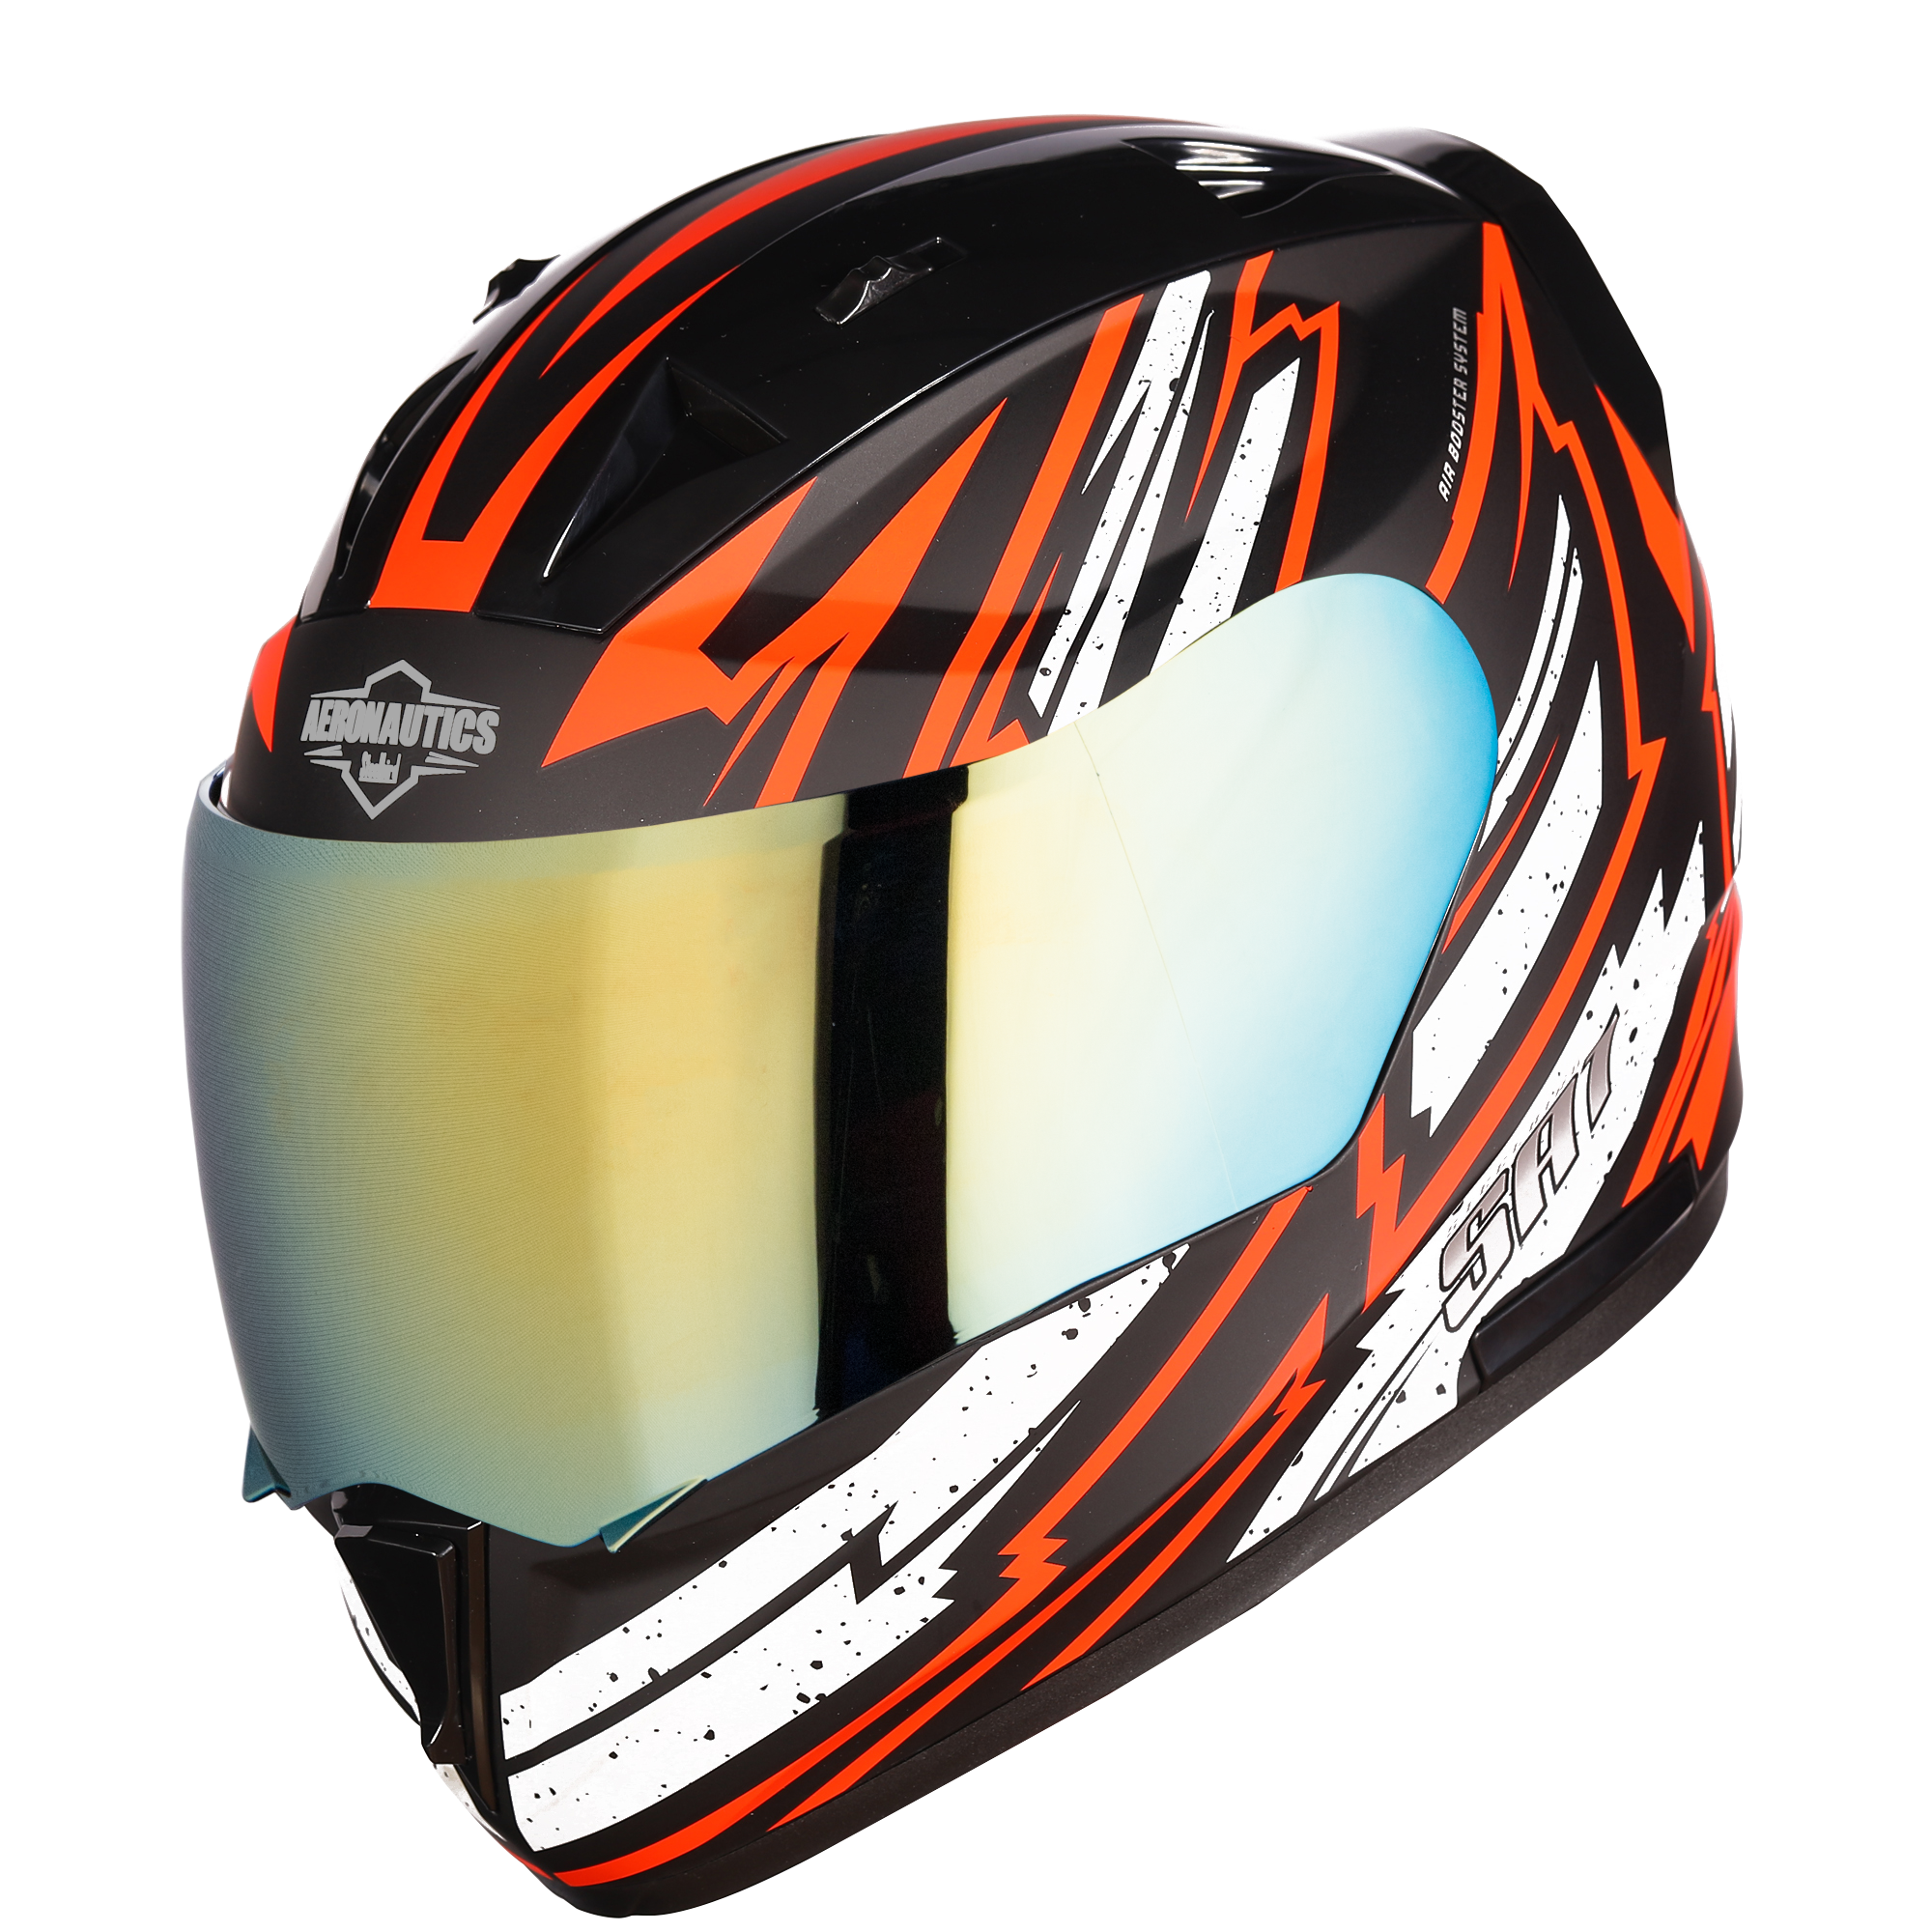 SA-1 BOOSTER MAT BLACK WITH ORANGE - CHROME GOLD VISOR (WITH EXTRA CLEAR VISOR)